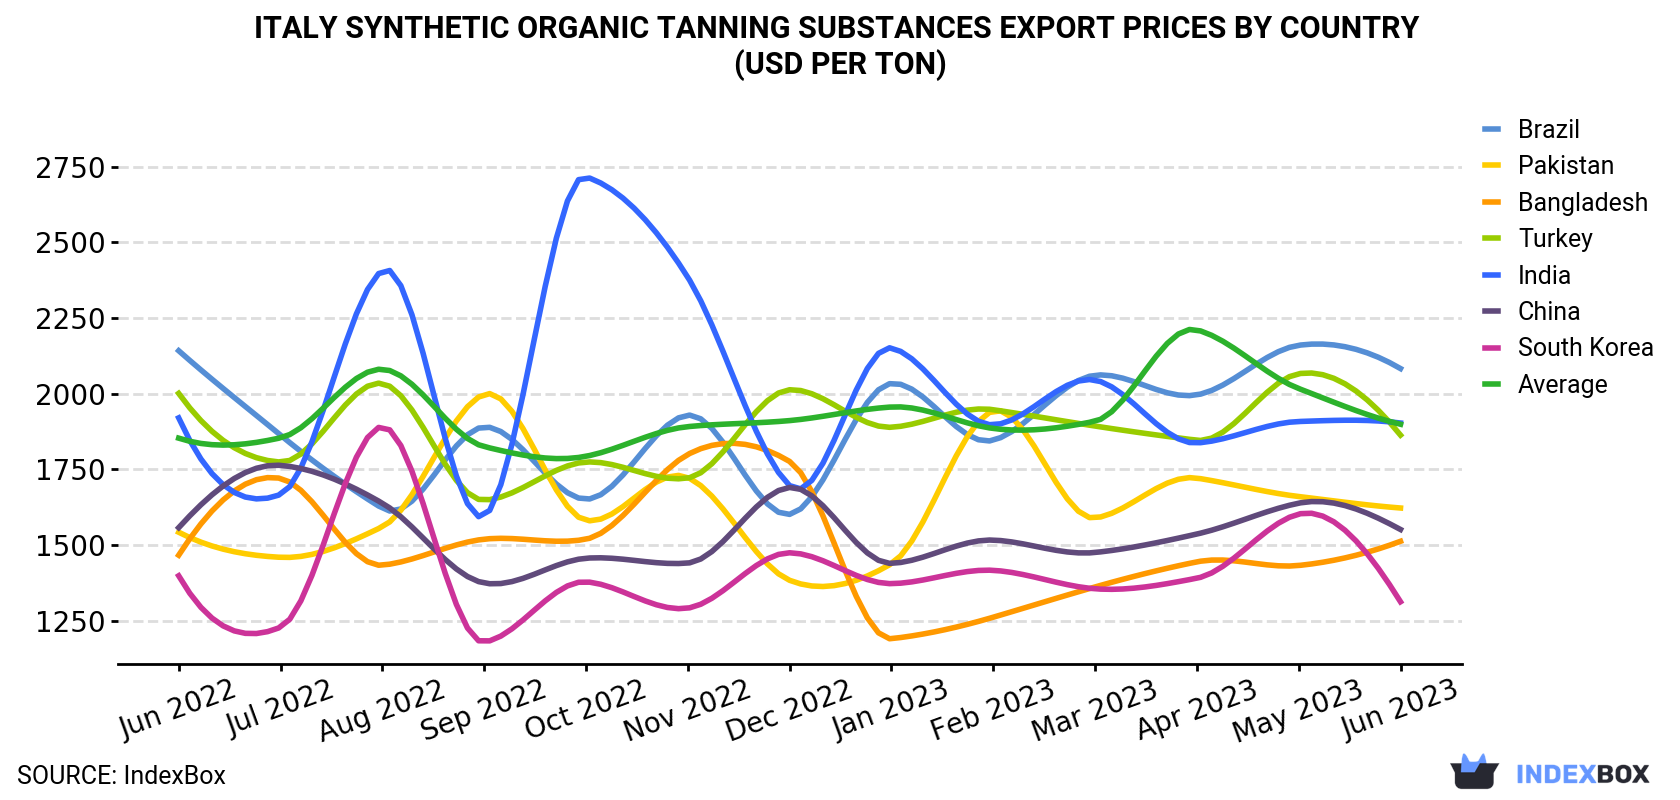 Italy Synthetic Organic Tanning Substances Export Prices By Country (USD Per Ton)